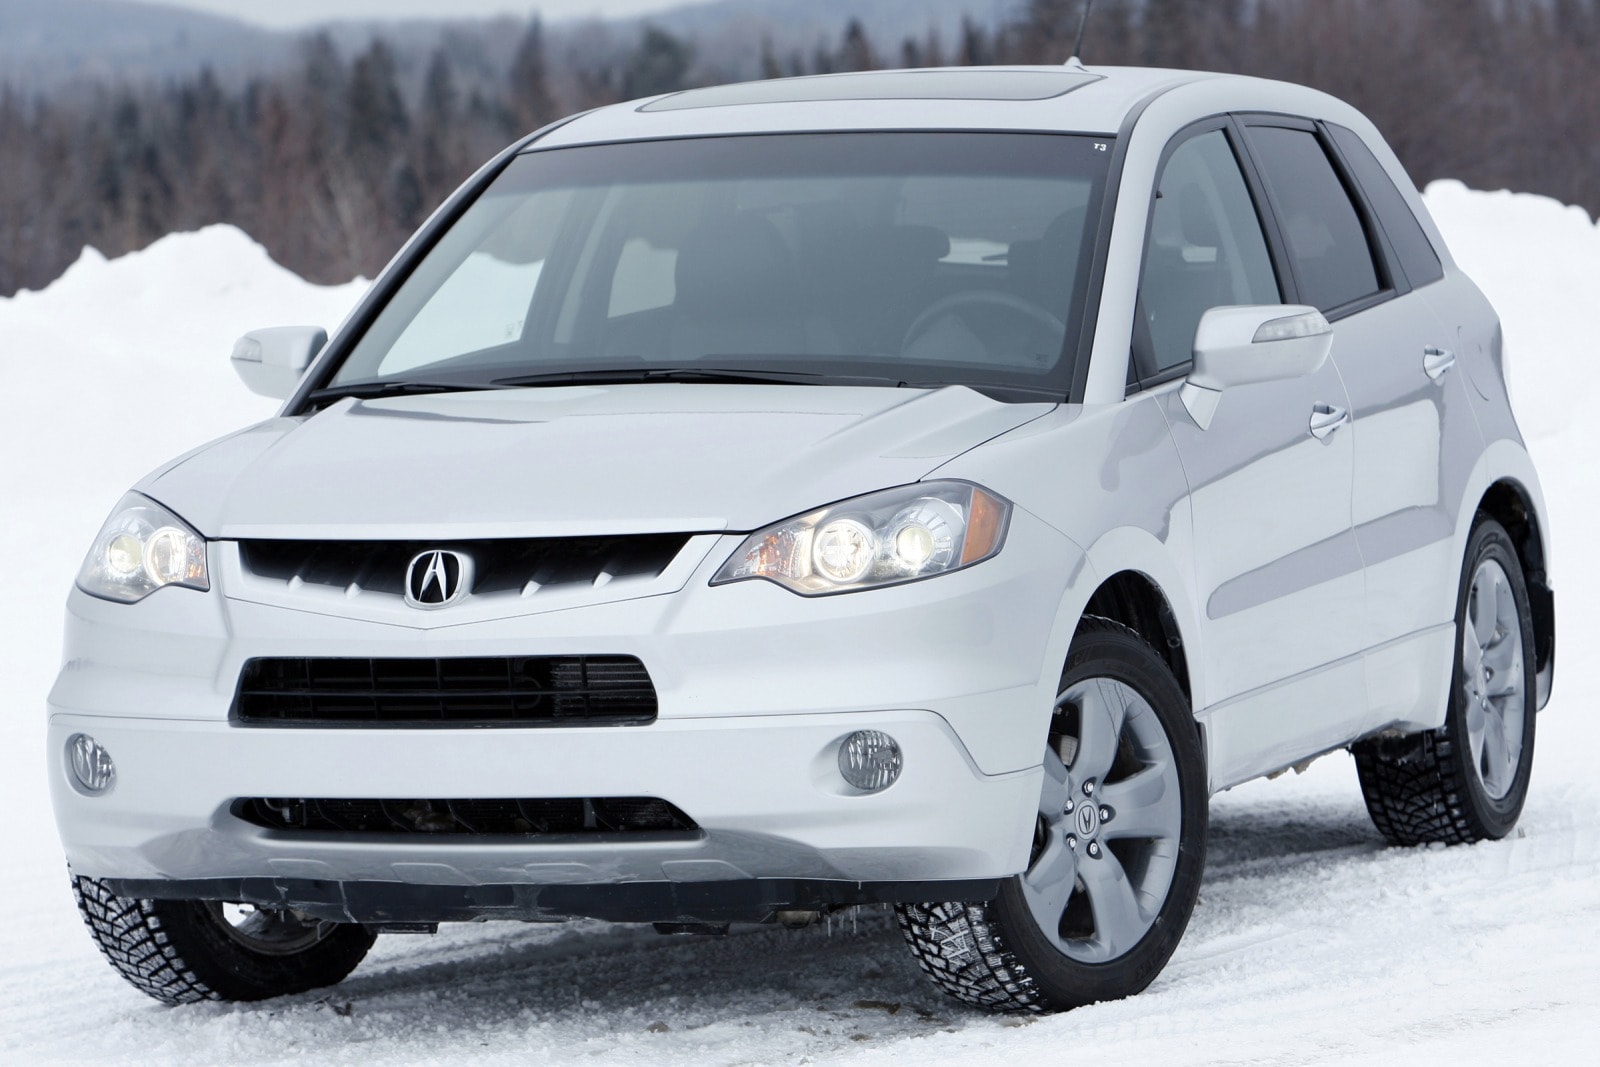 2008 Acura RDX Review & Ratings | Edmunds